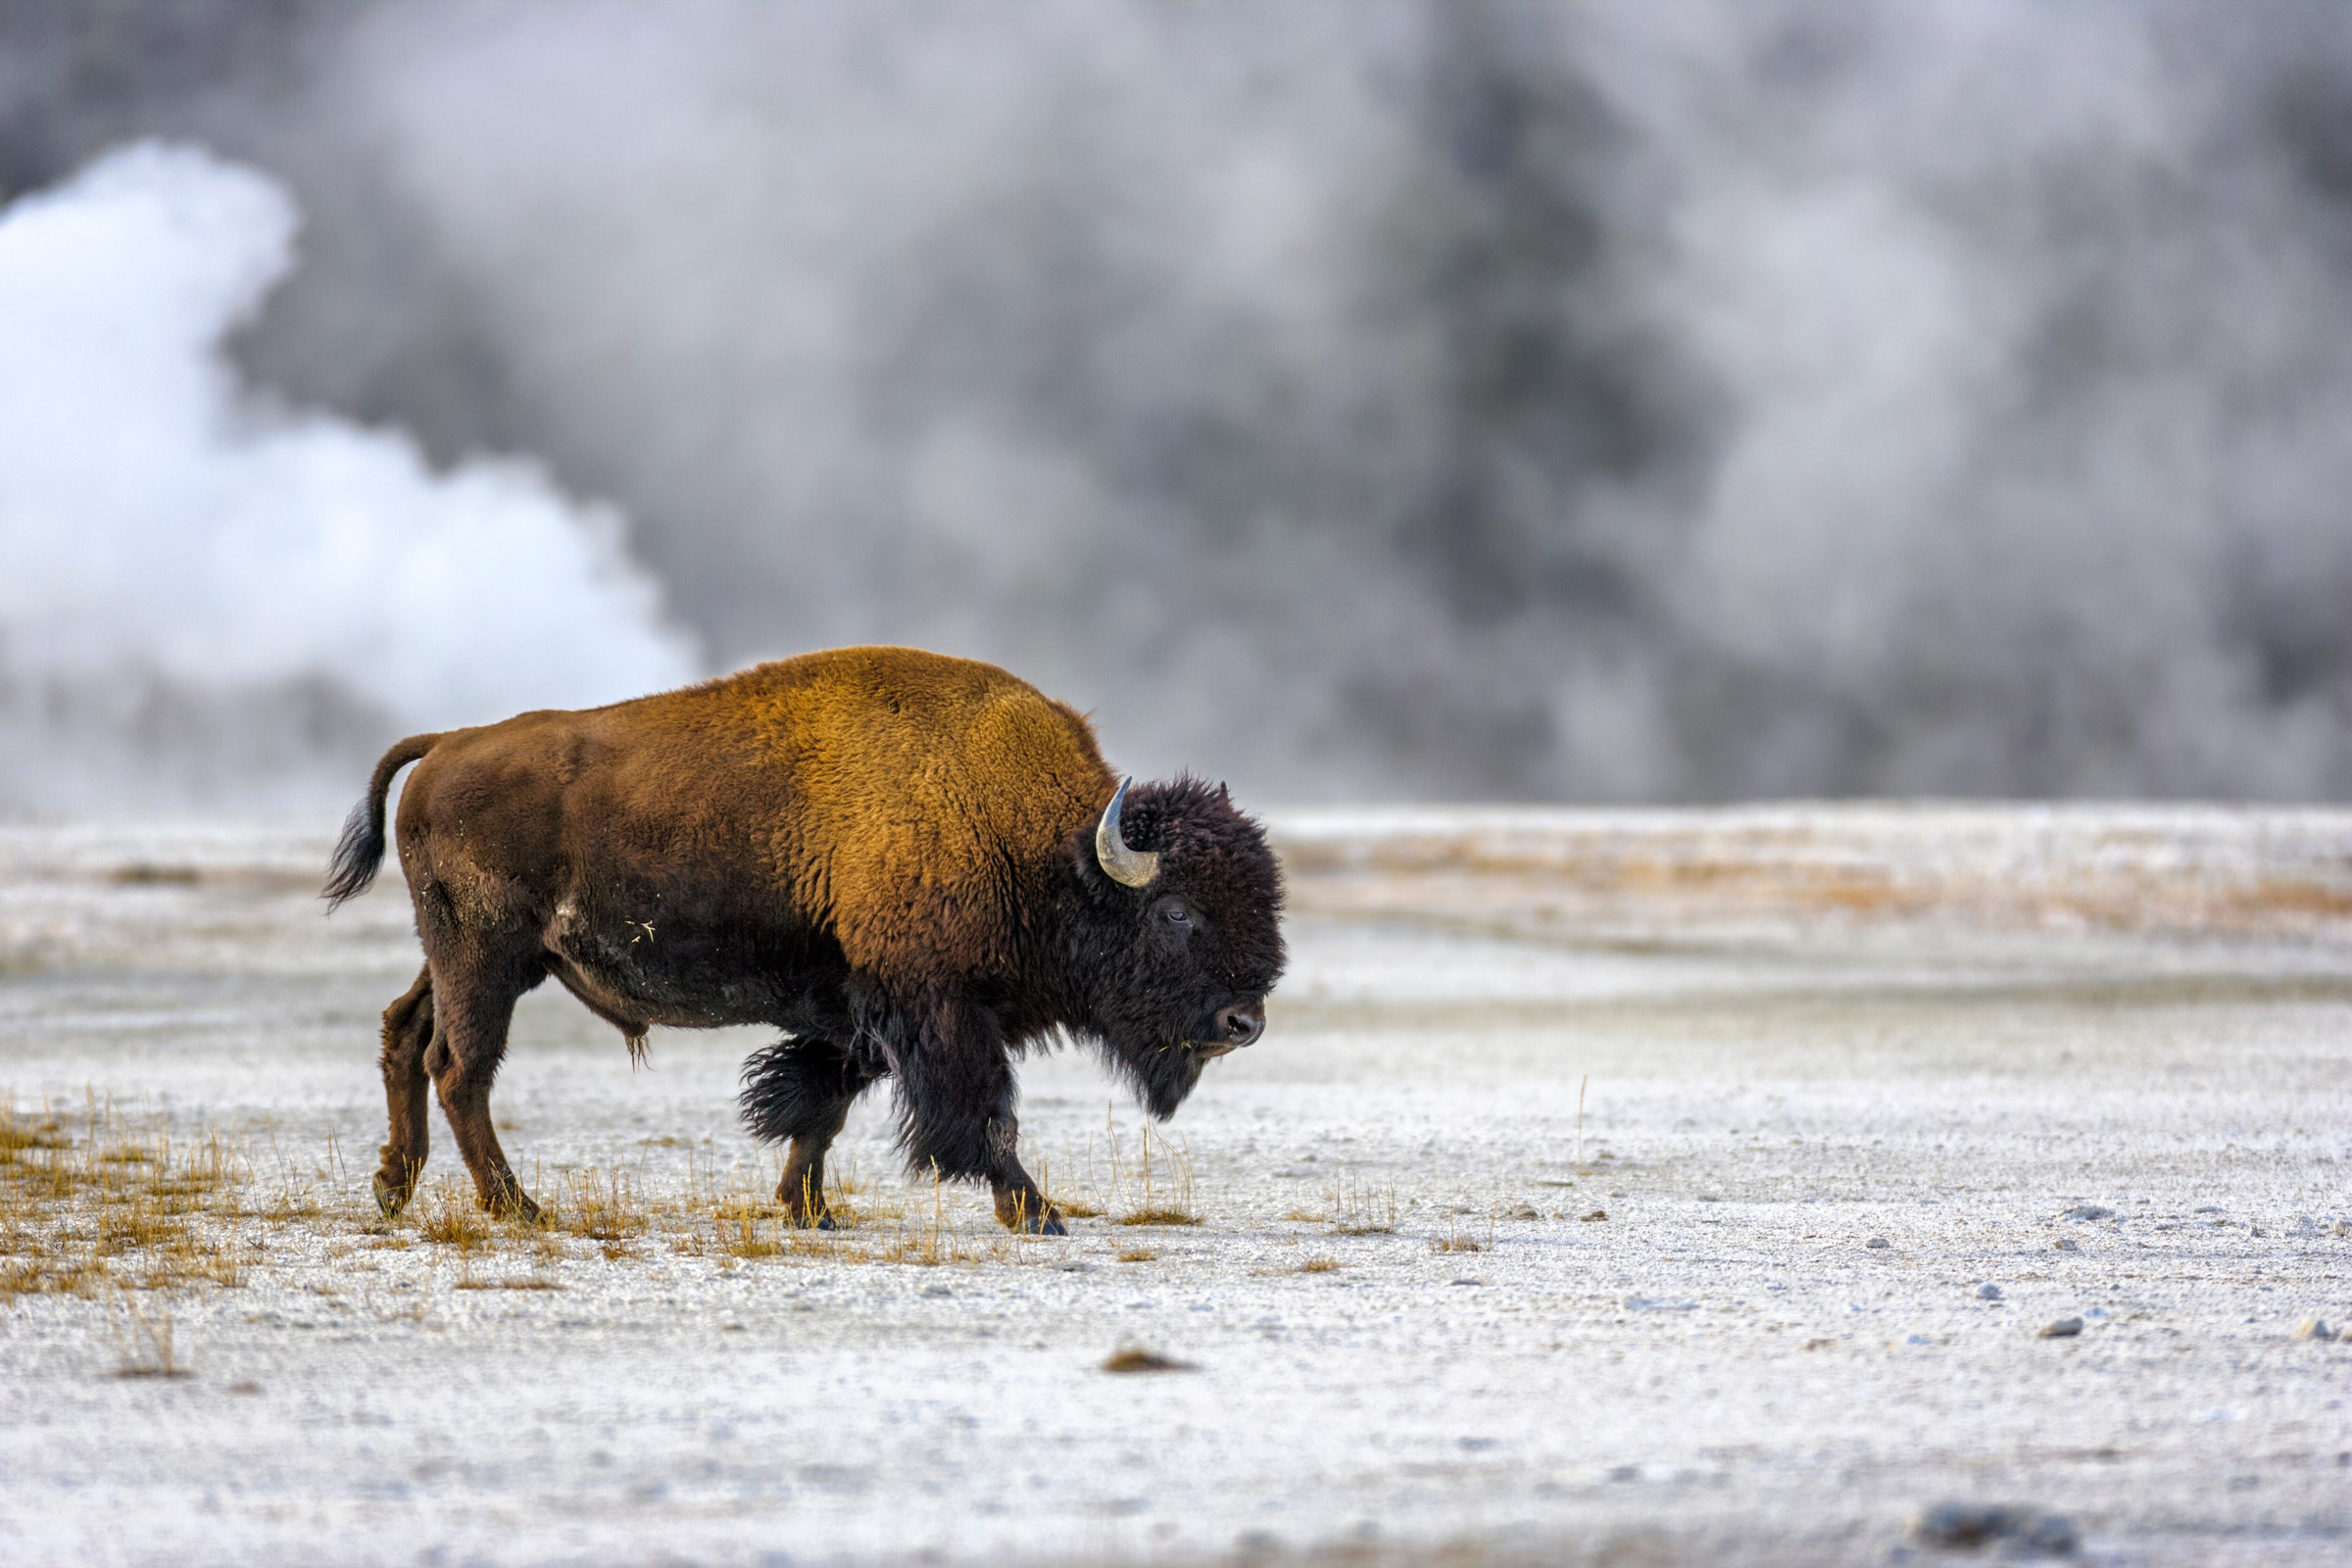 Bison by the Midway Geyser Basin in Yellowstone National Park